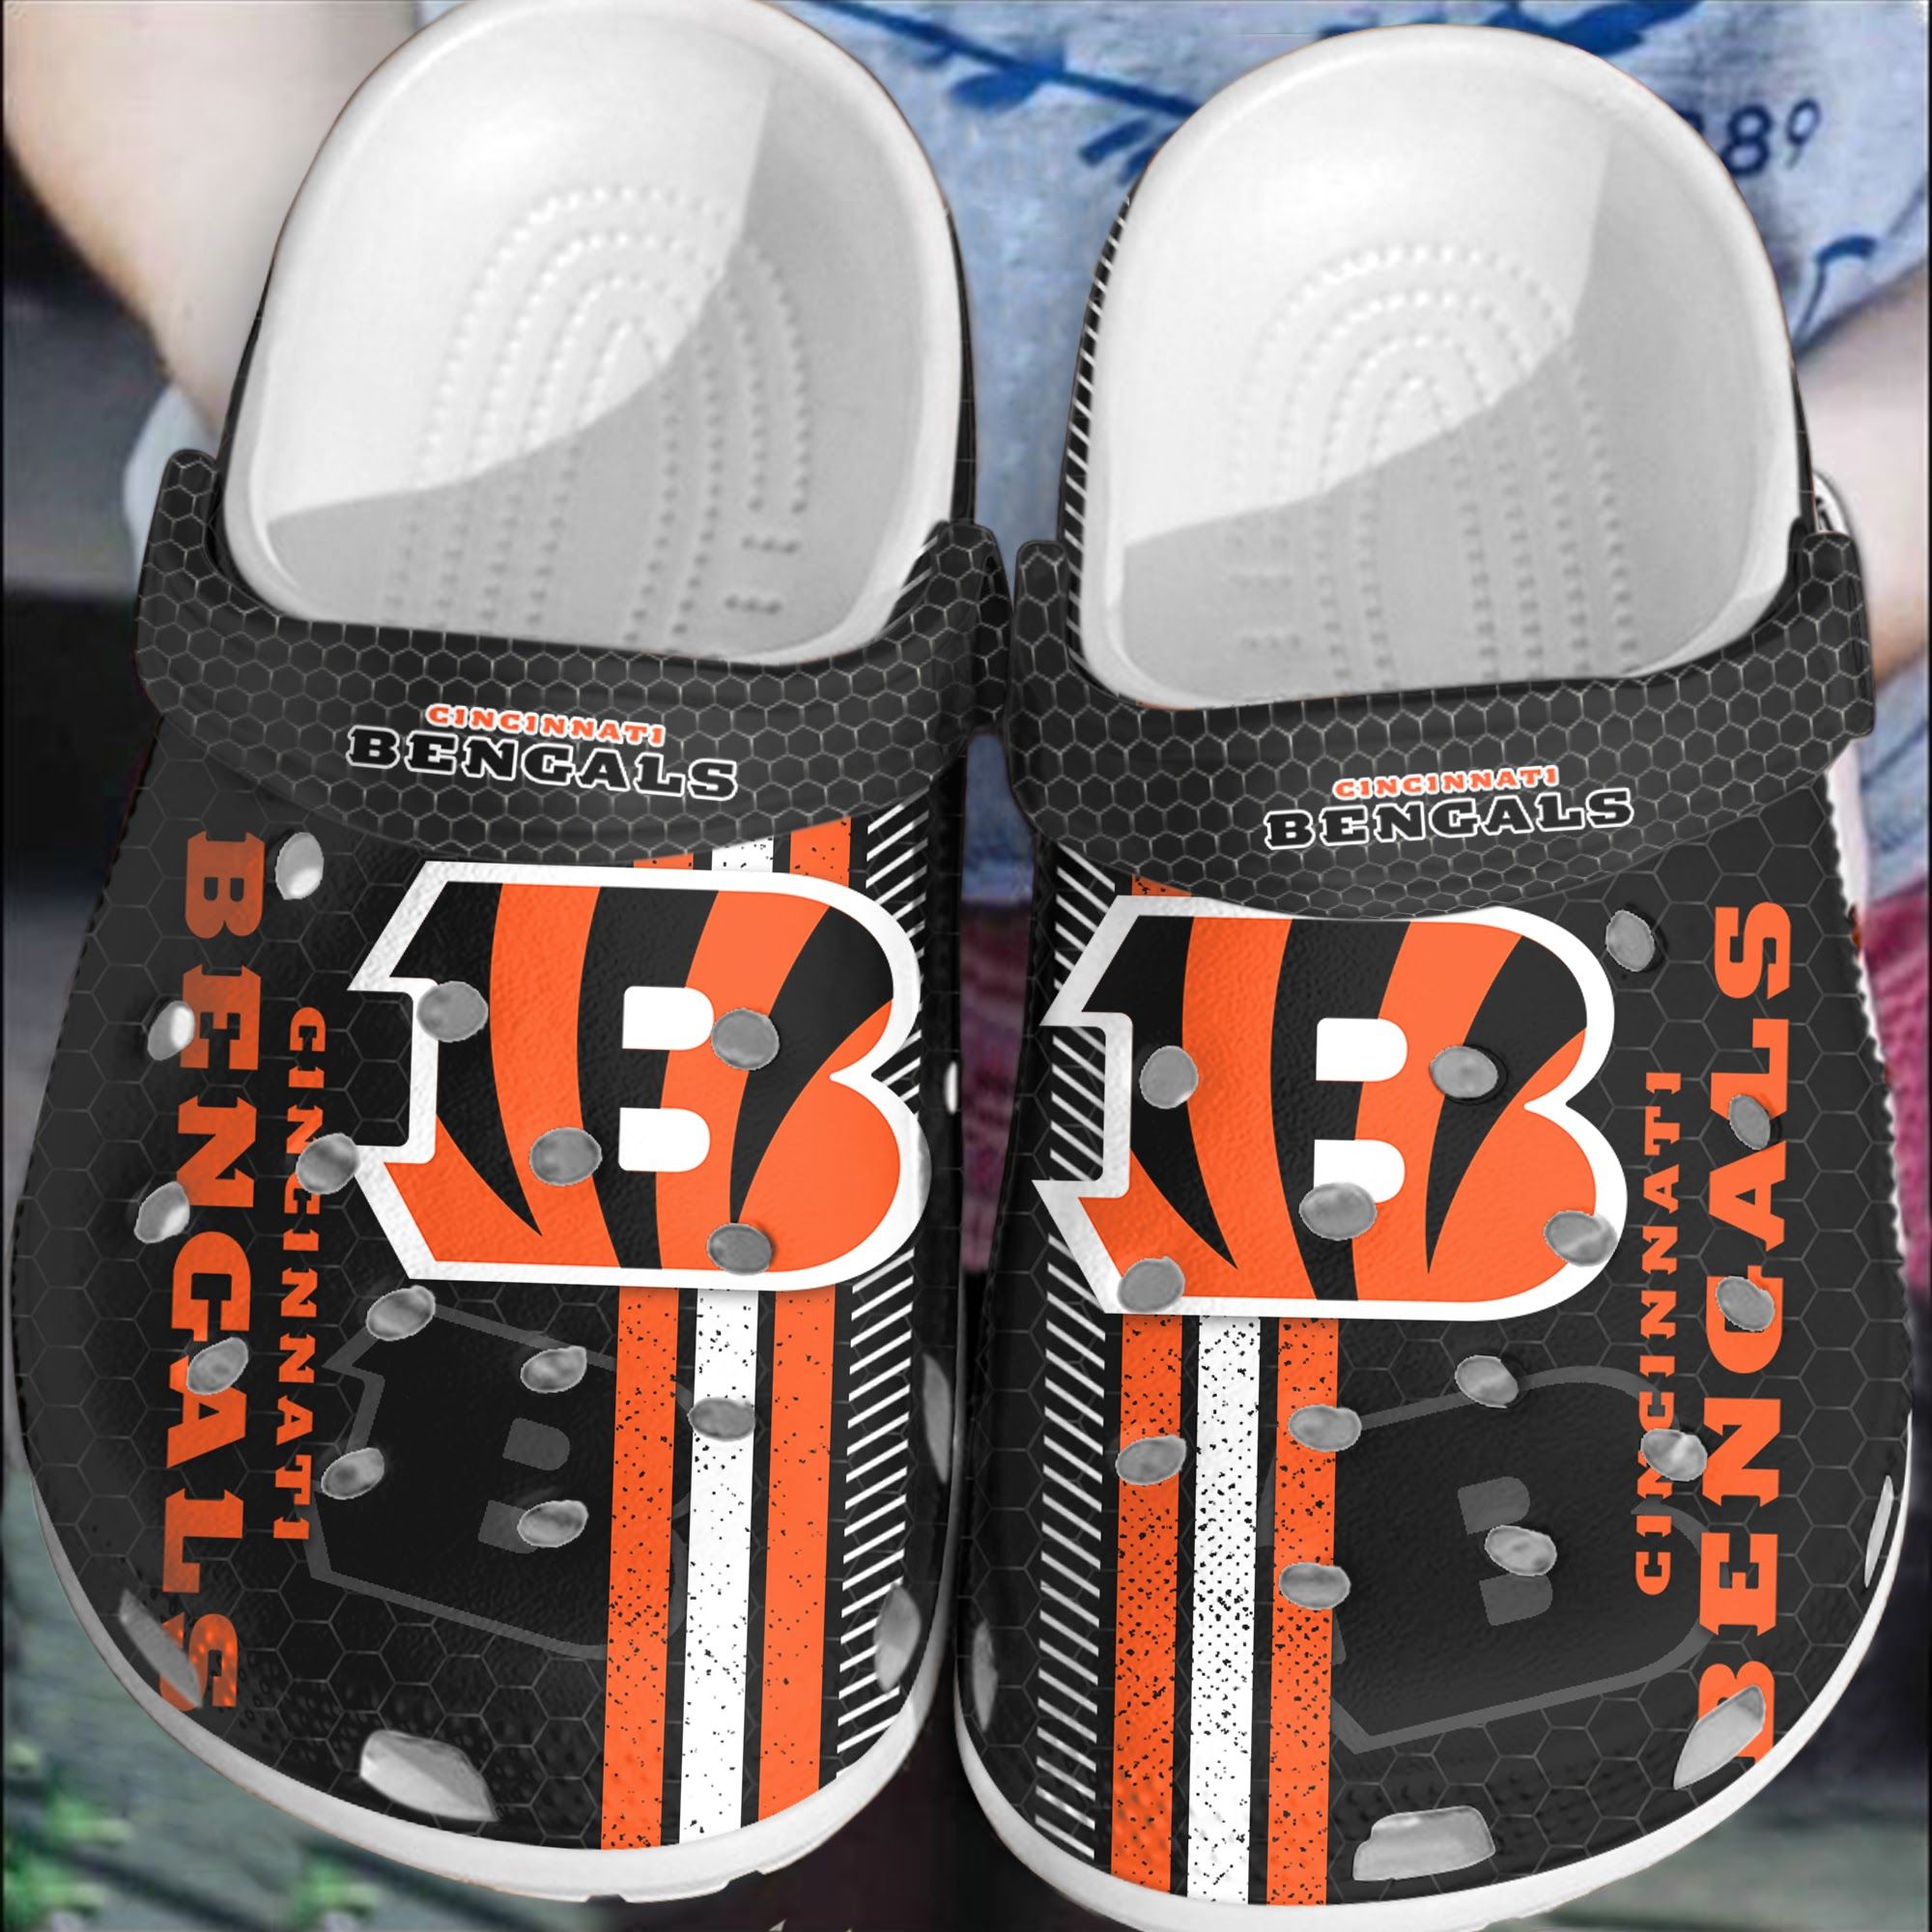 If you'd like to purchase a pair of Crocband Clogs, be sure to check out the official website. 53